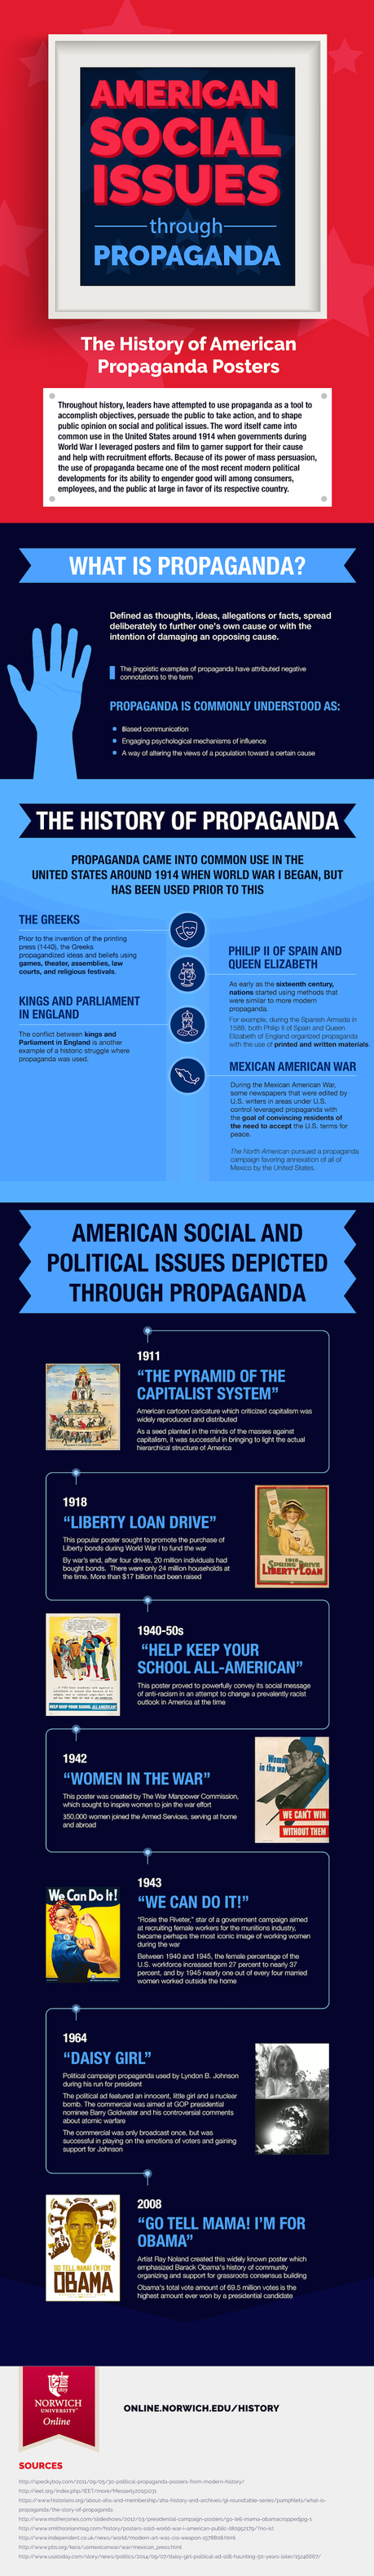 The History Of Propaganda Posters In The US And Their Role In Highlighting Social Issues [Infographic]